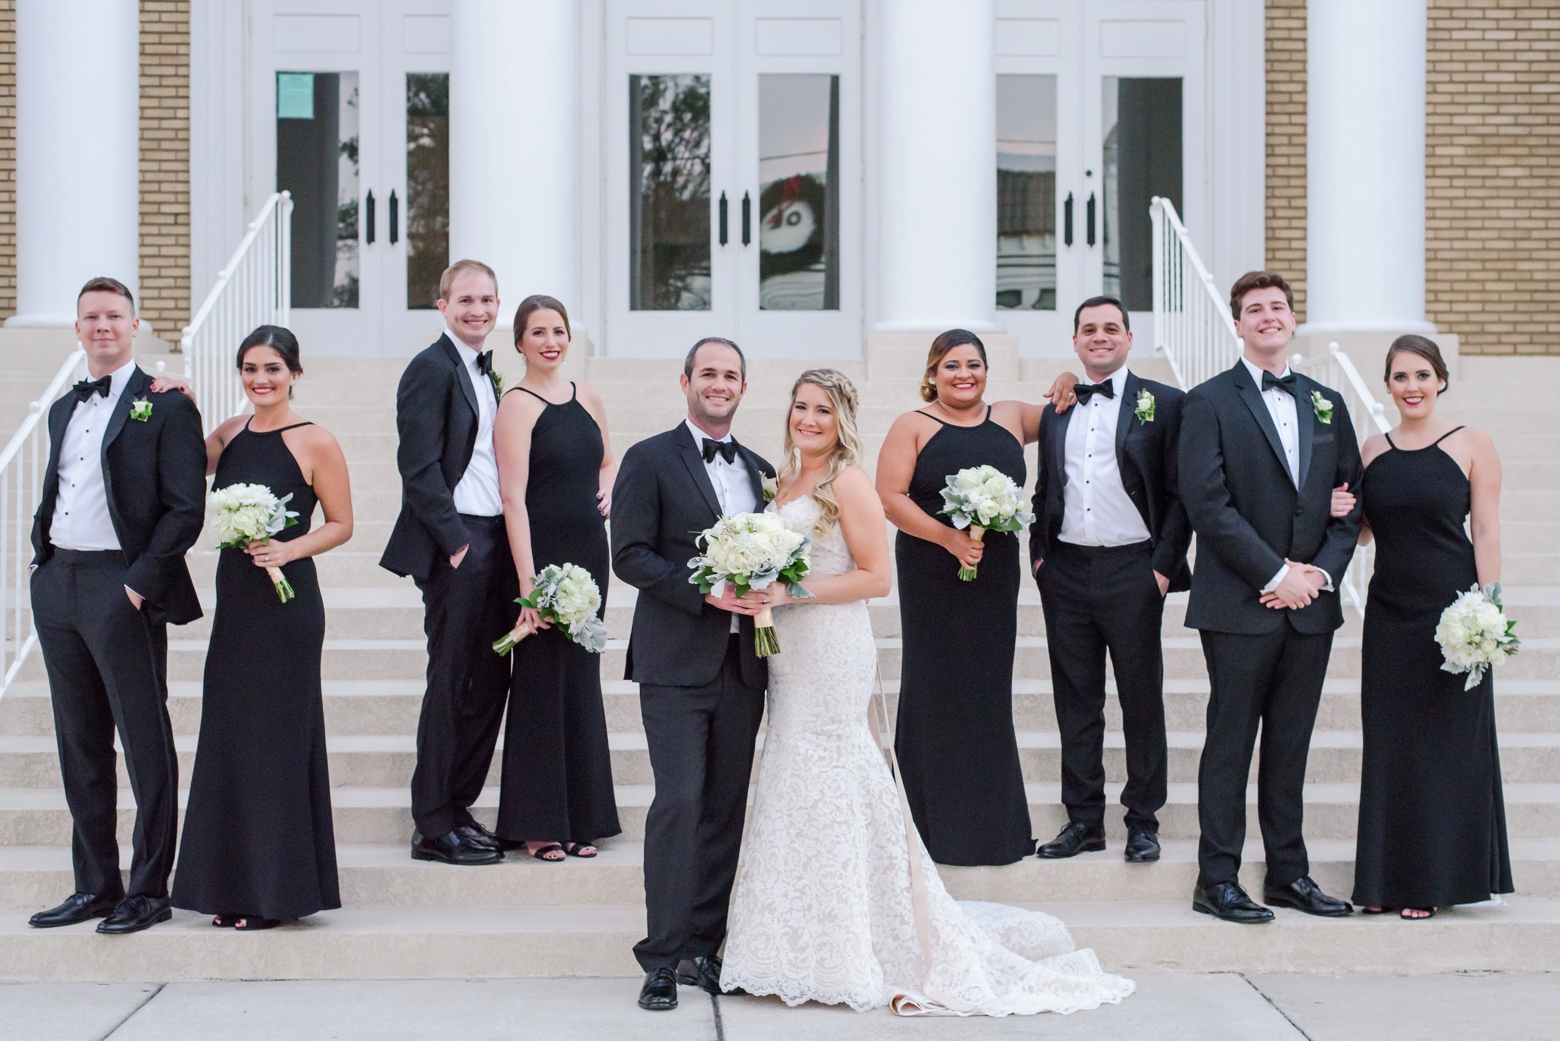 The Bridal Party pose on the steps of a building in Downtown Tampa, FL